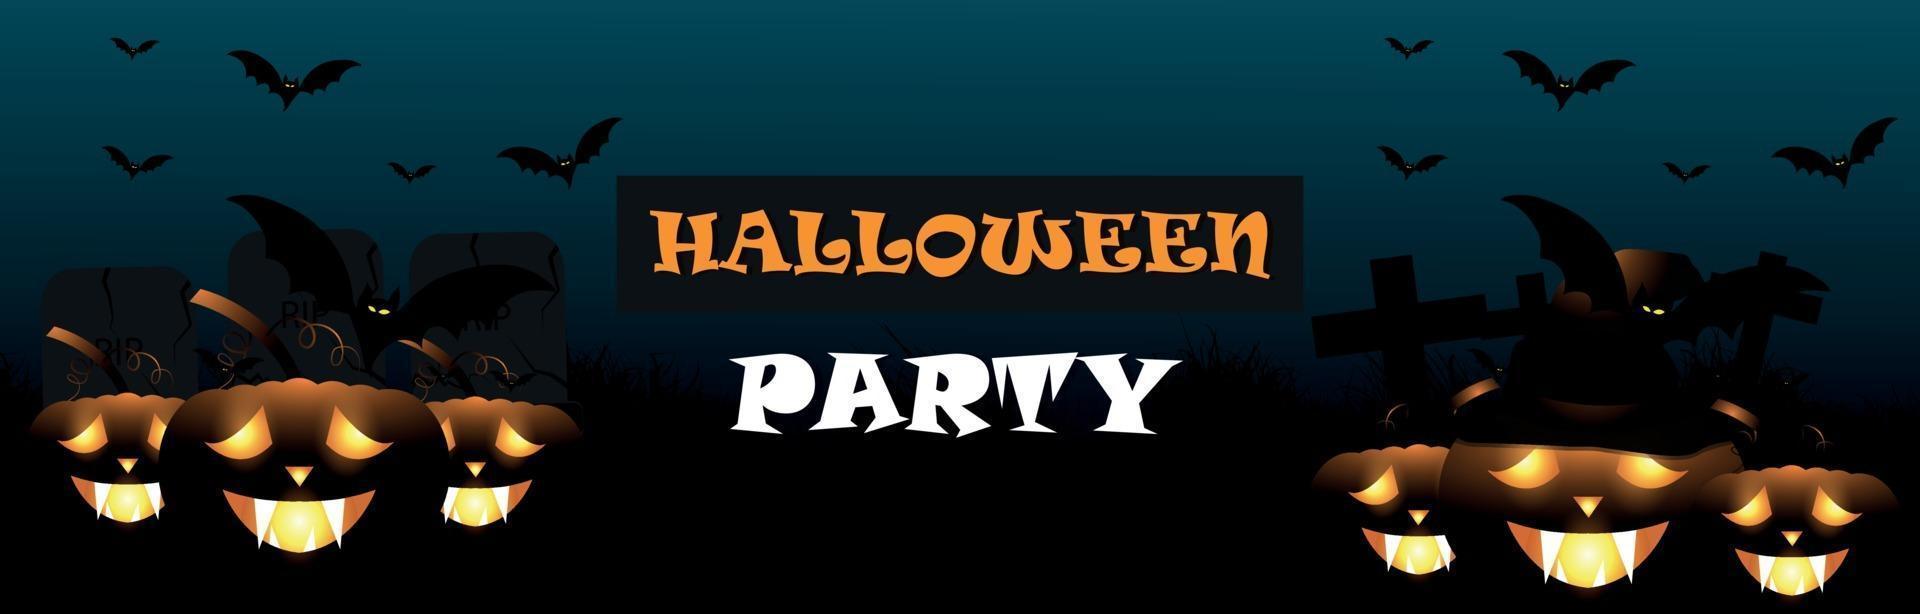 Halloween party banner with glowing pumpkin, flying bats on horror background vector